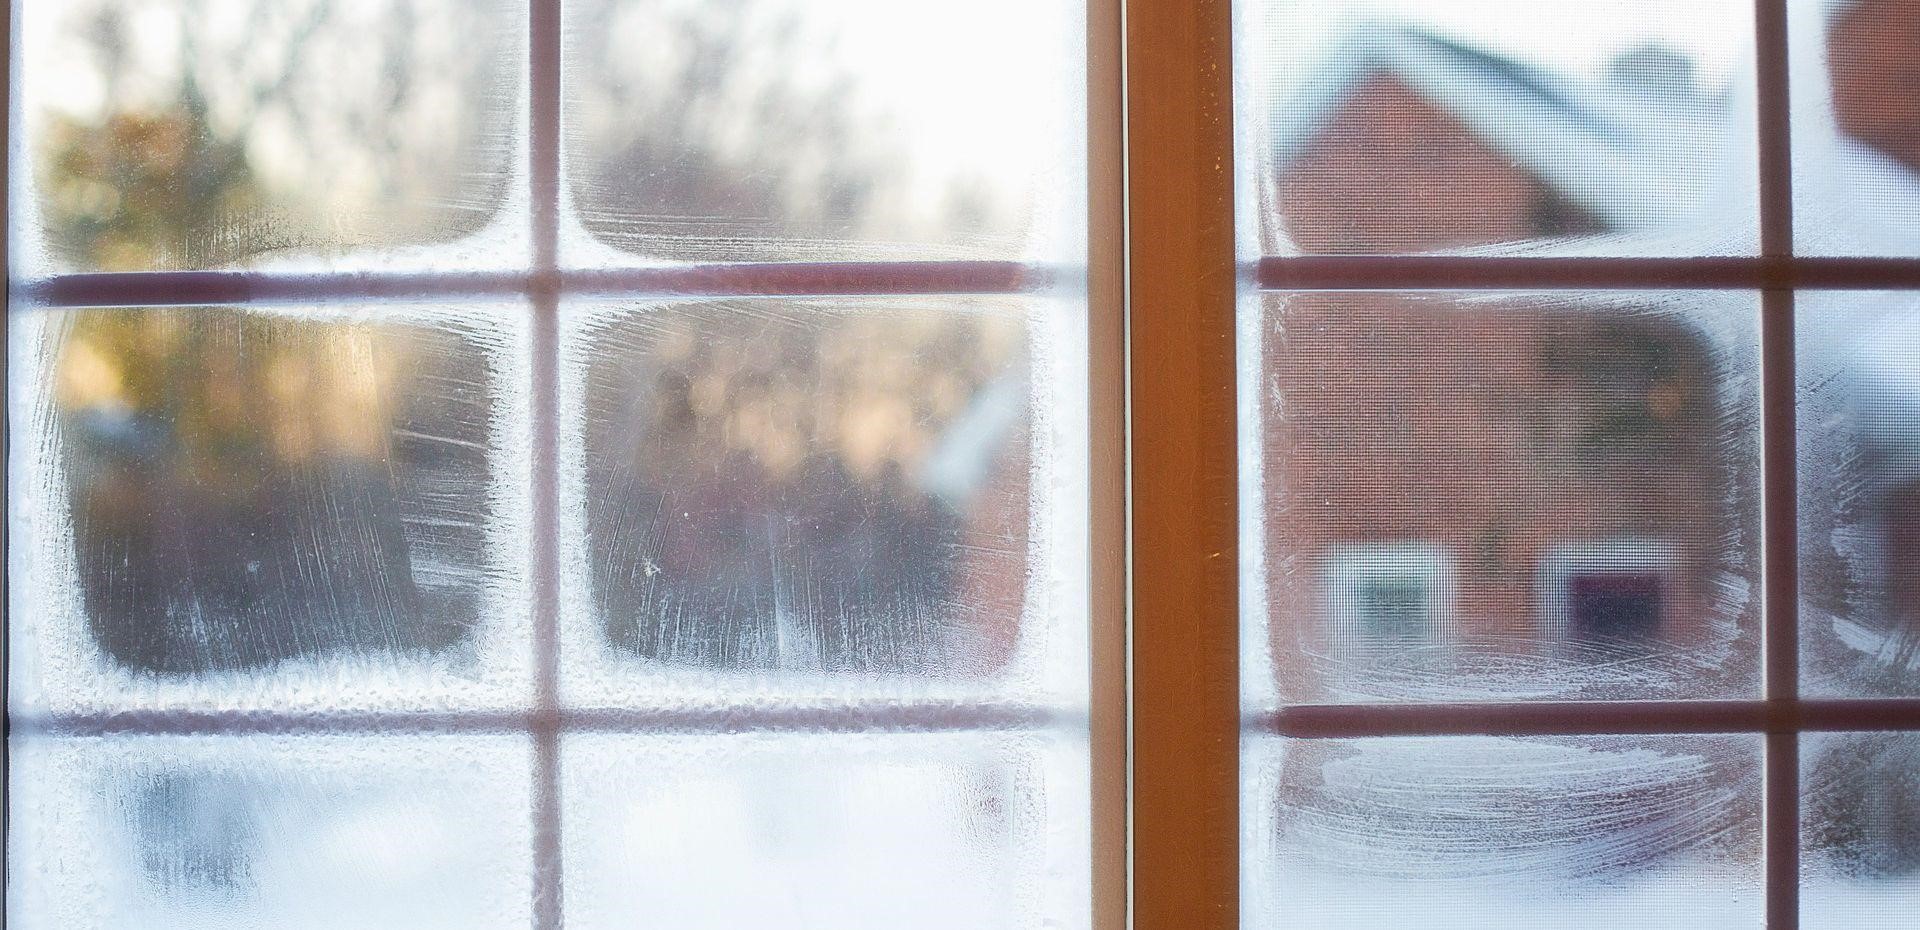 condensation on a window, with a snowy house seen outside